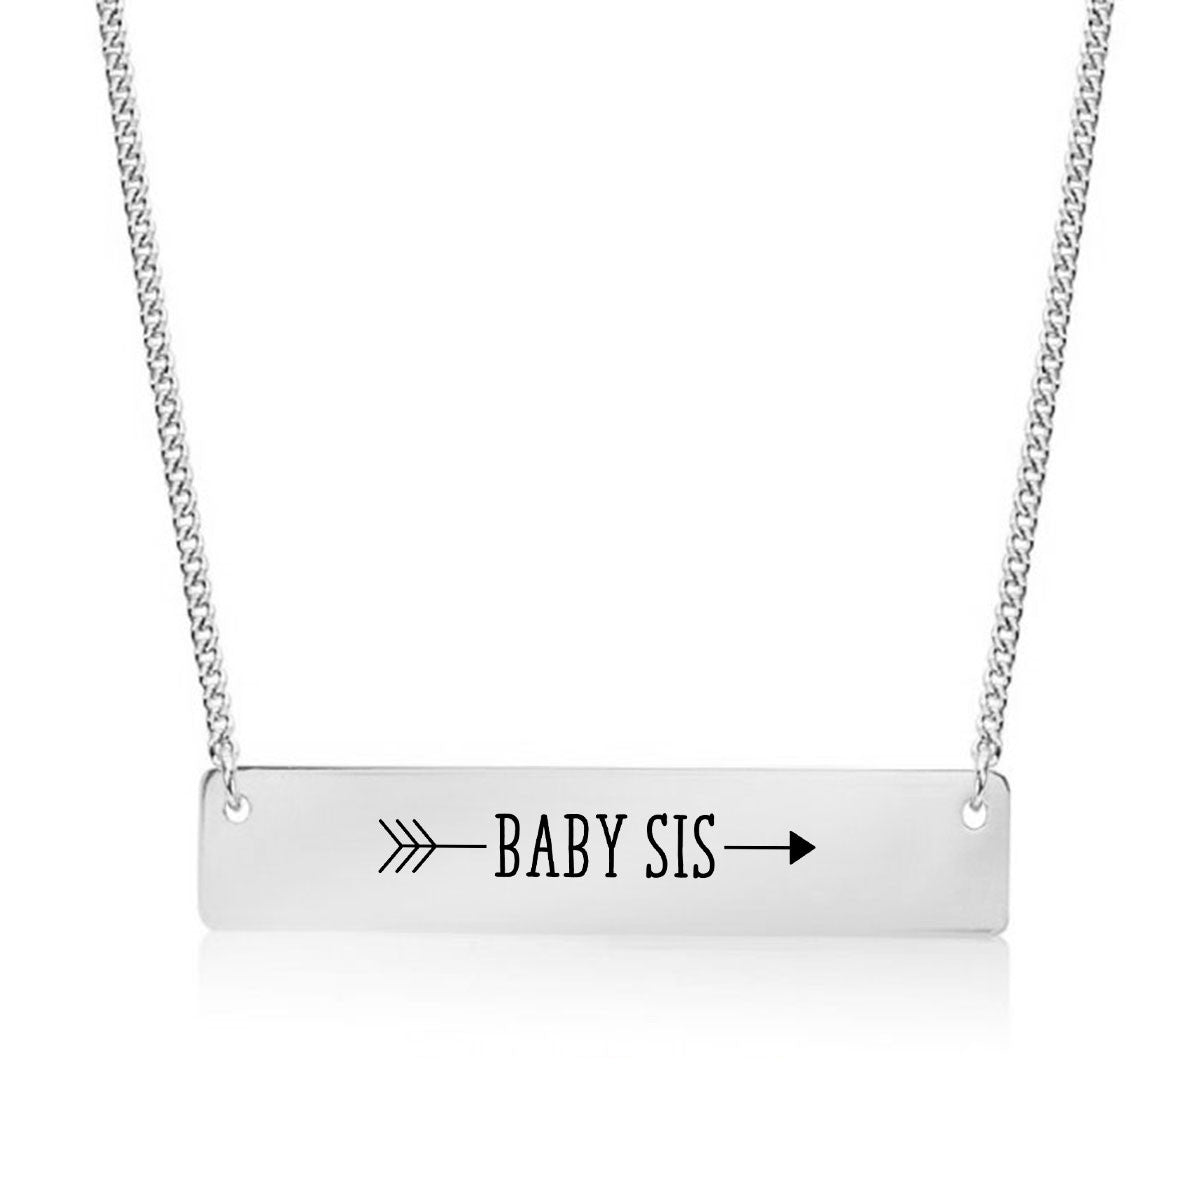 Baby Sister Arrow Gold / Silver Bar Necklace - Sister Gifts - pipercleo.com